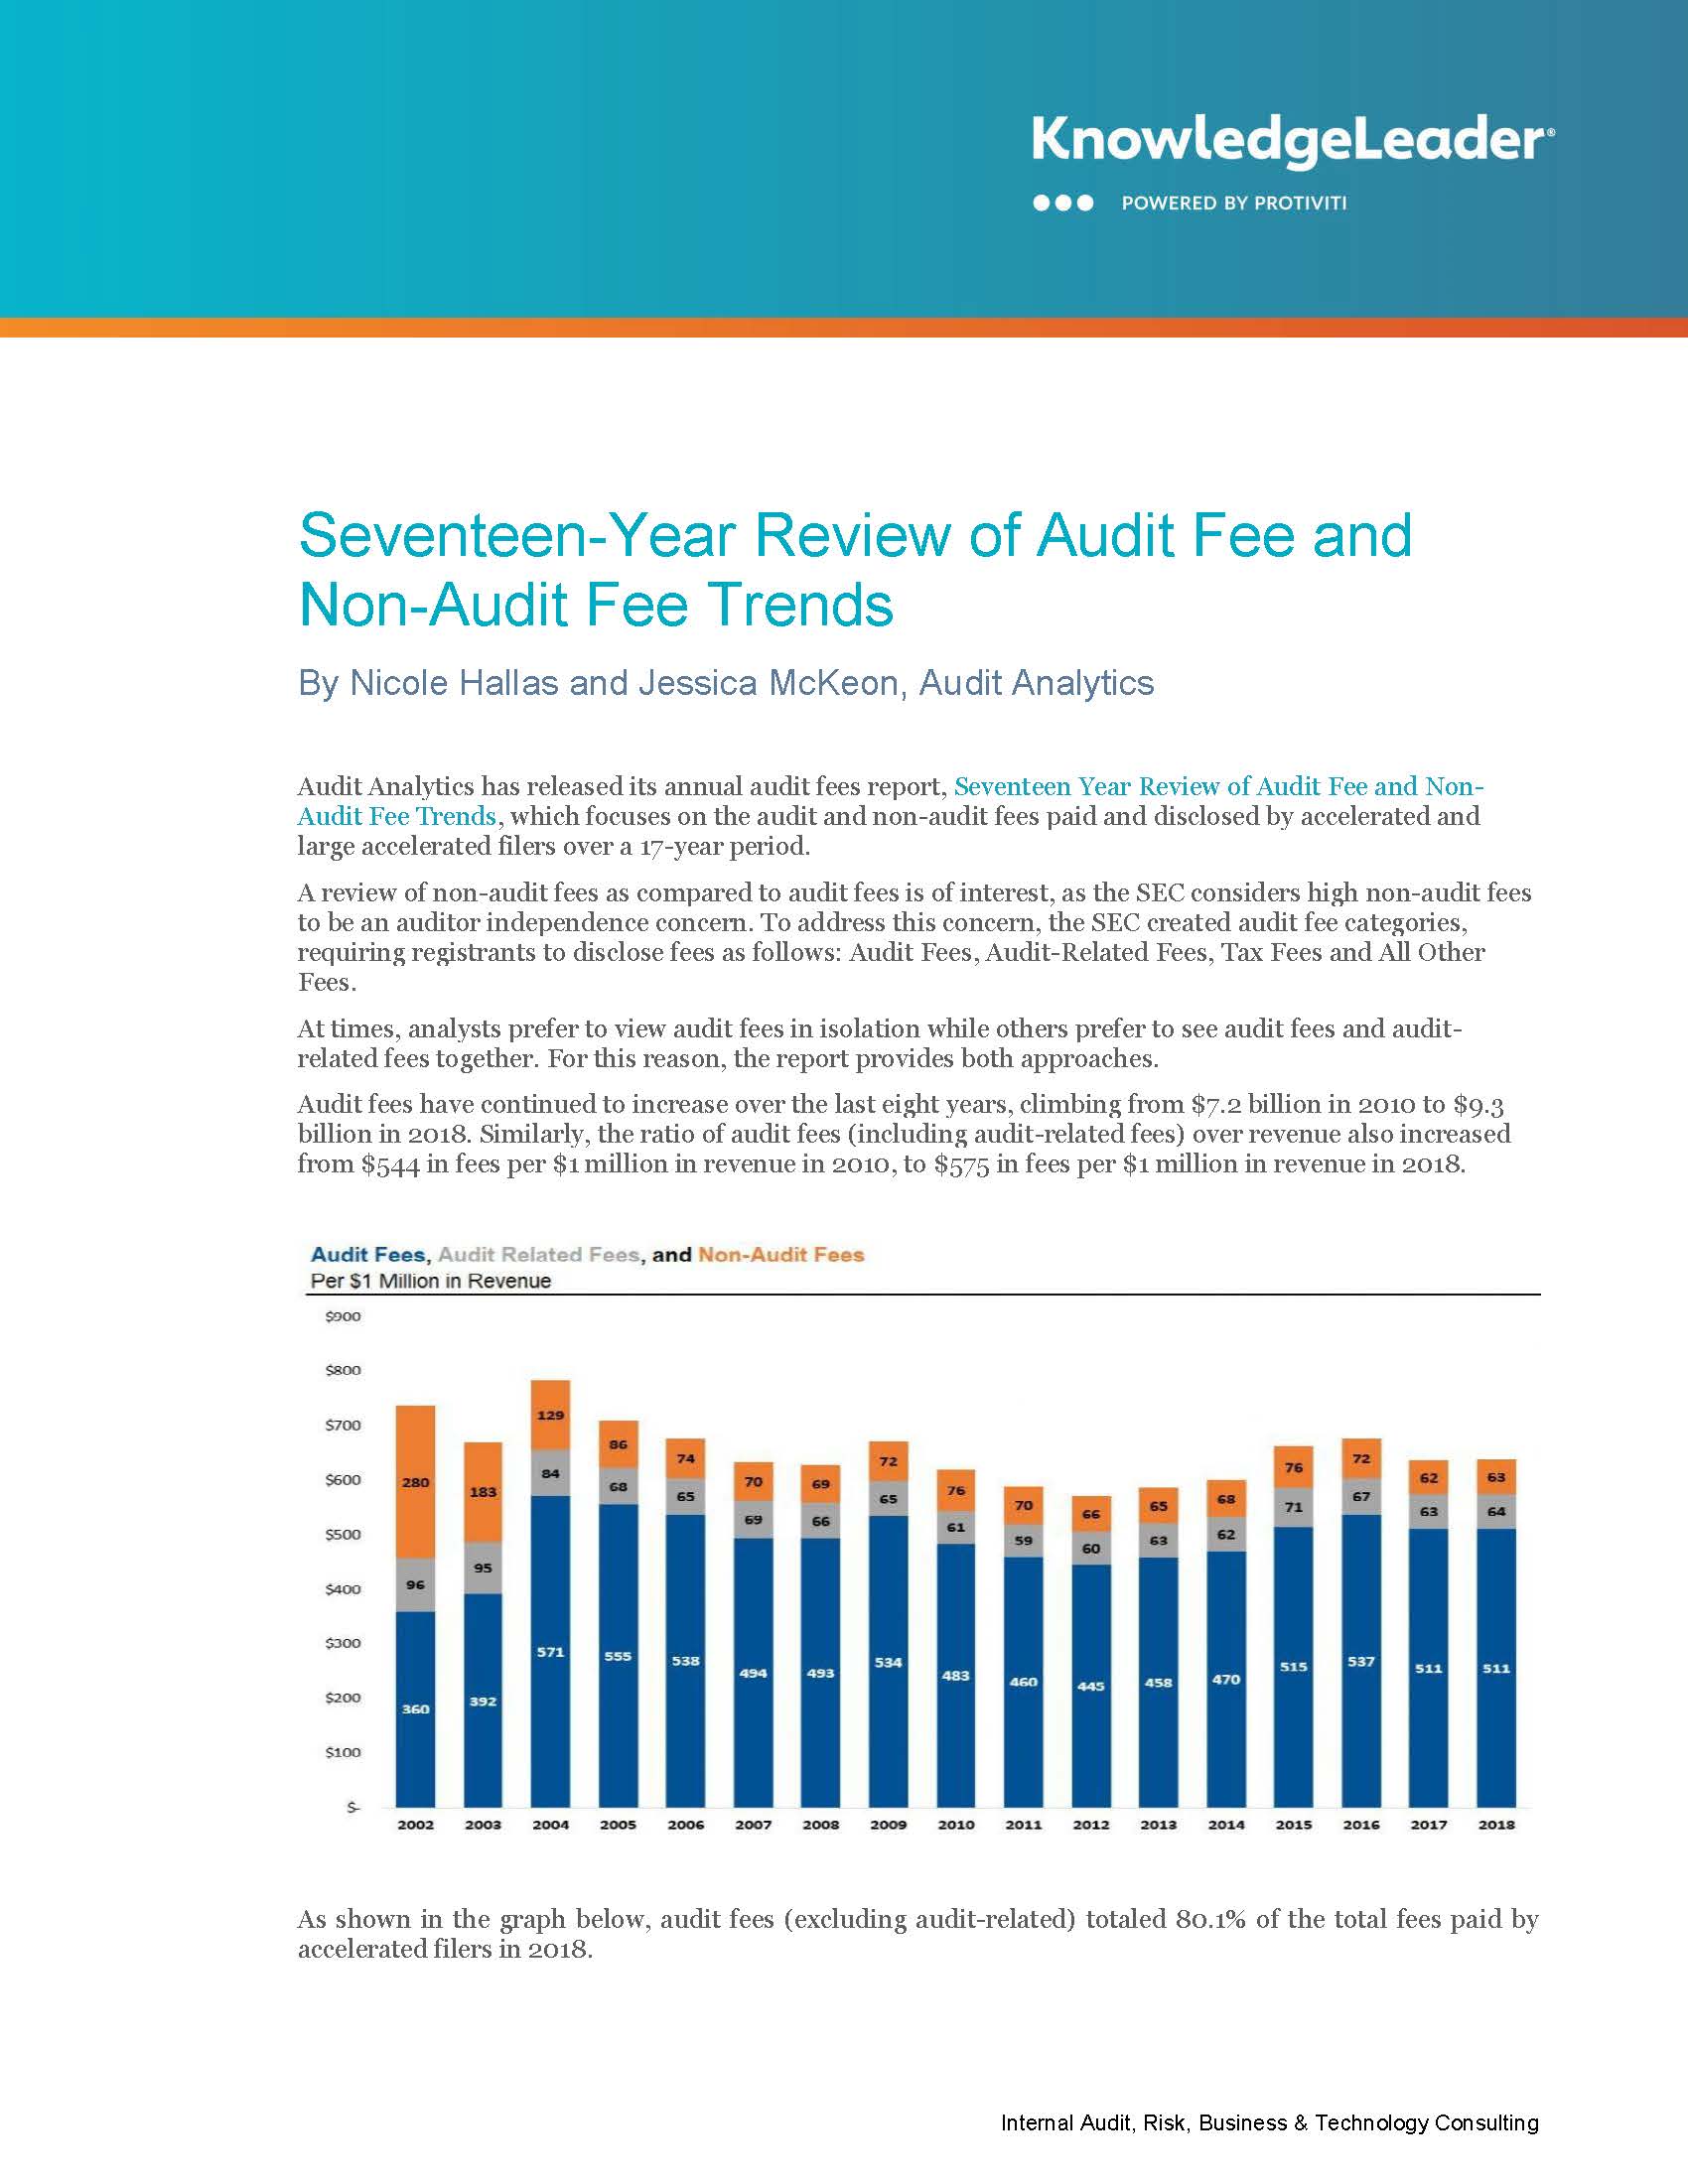 Screenshot of the first page of Seventeen-Year Review of Audit Fee and Non-Audit Fee Trends